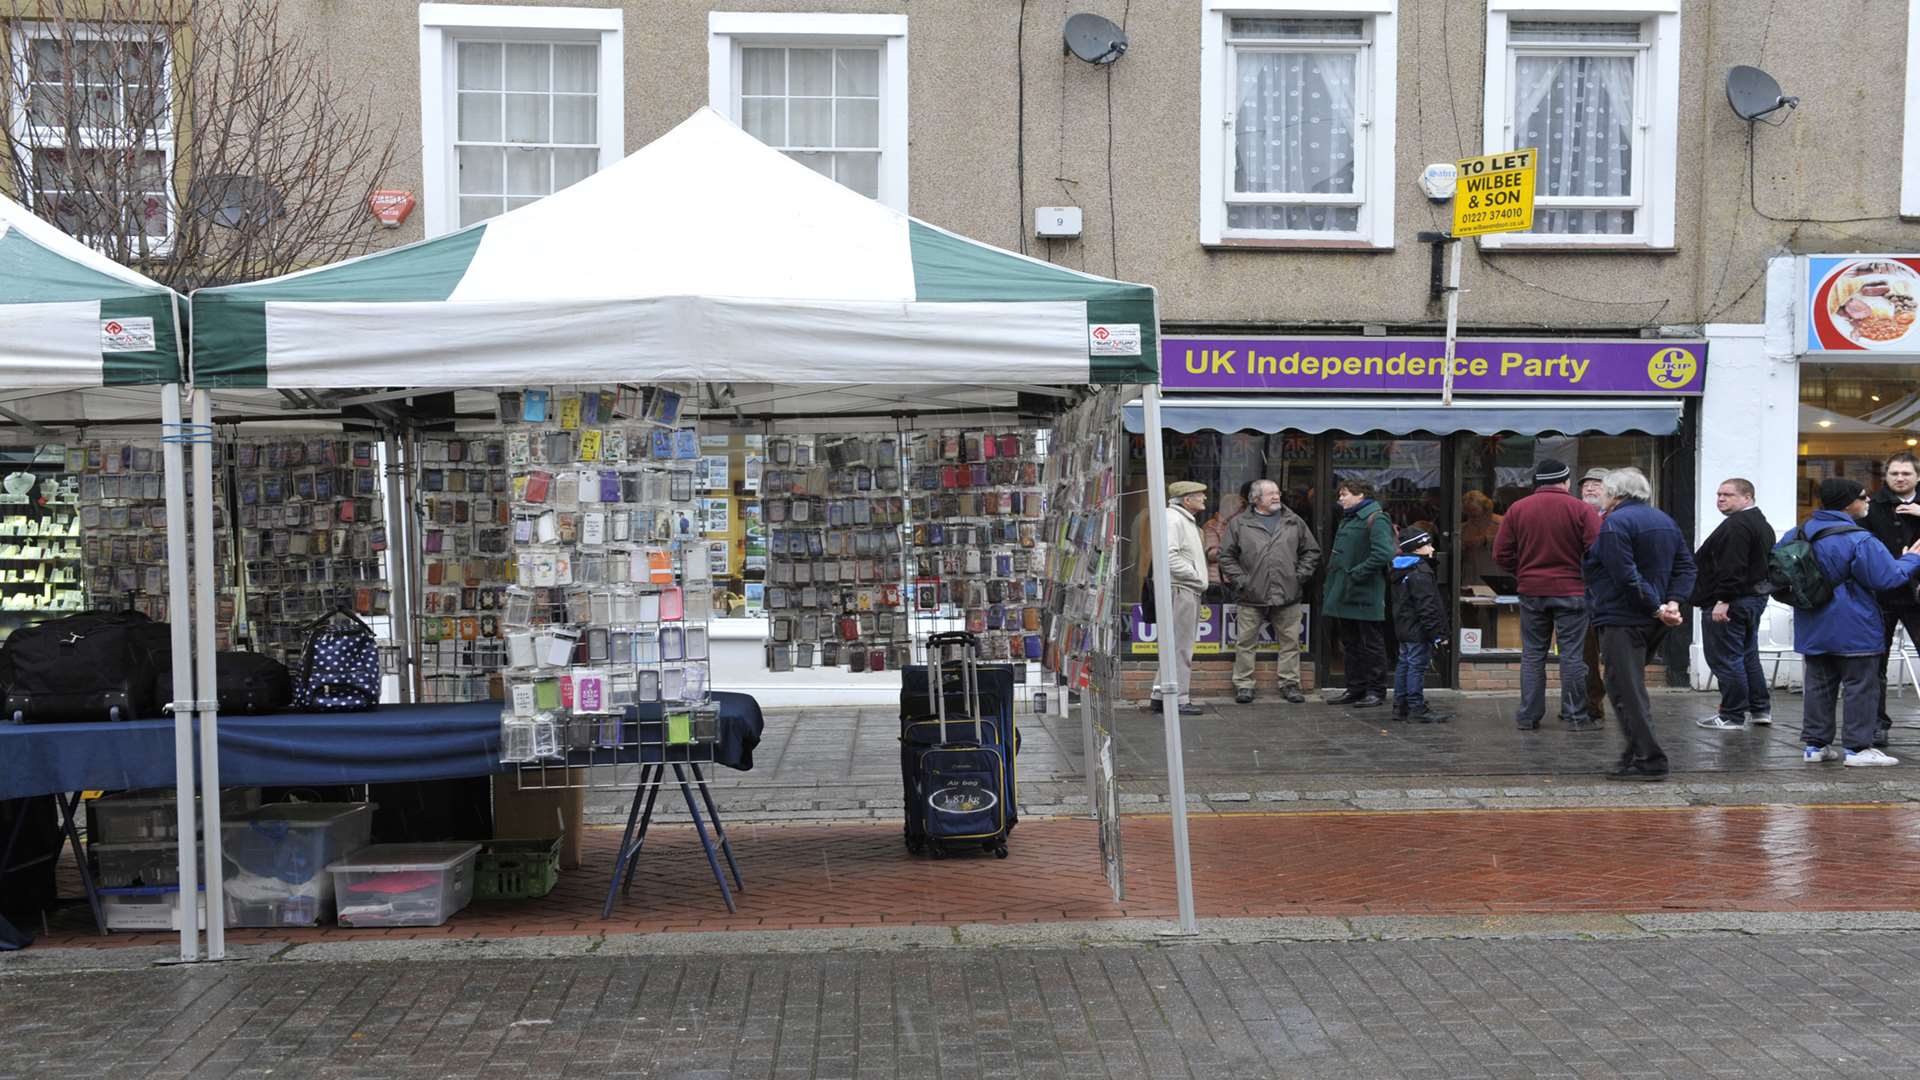 The Herne Bay market meant Nigel Farage's visit to the town was cancelled. Picture: Tony Flashman